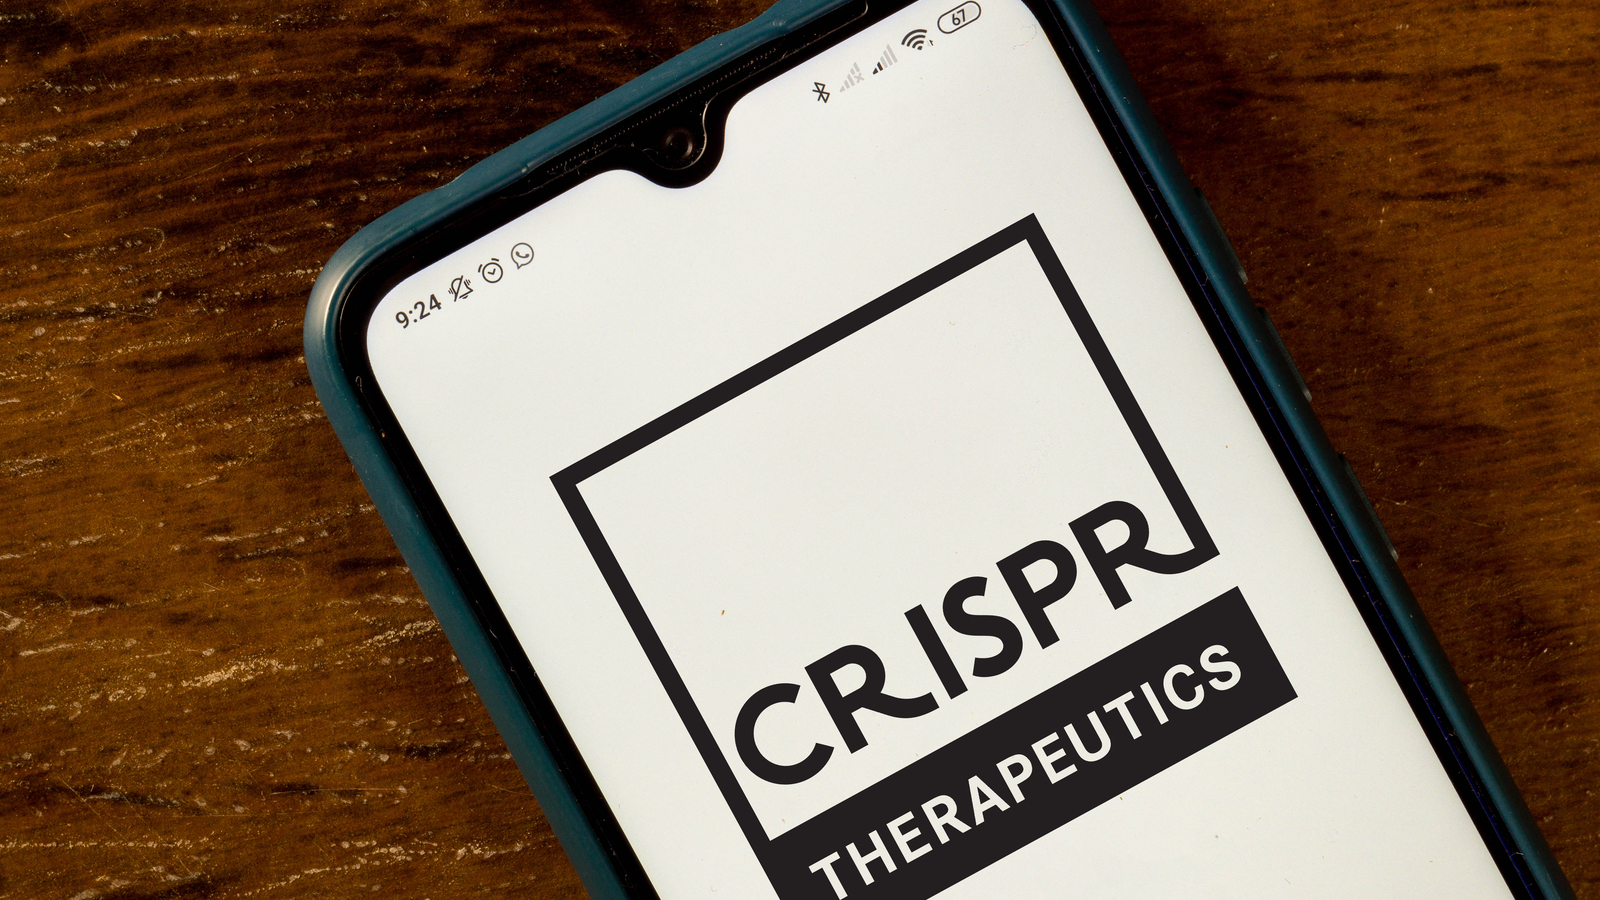 the CRISPR Therapeutics logo seen displayed on a smartphone, CRSP Stock.